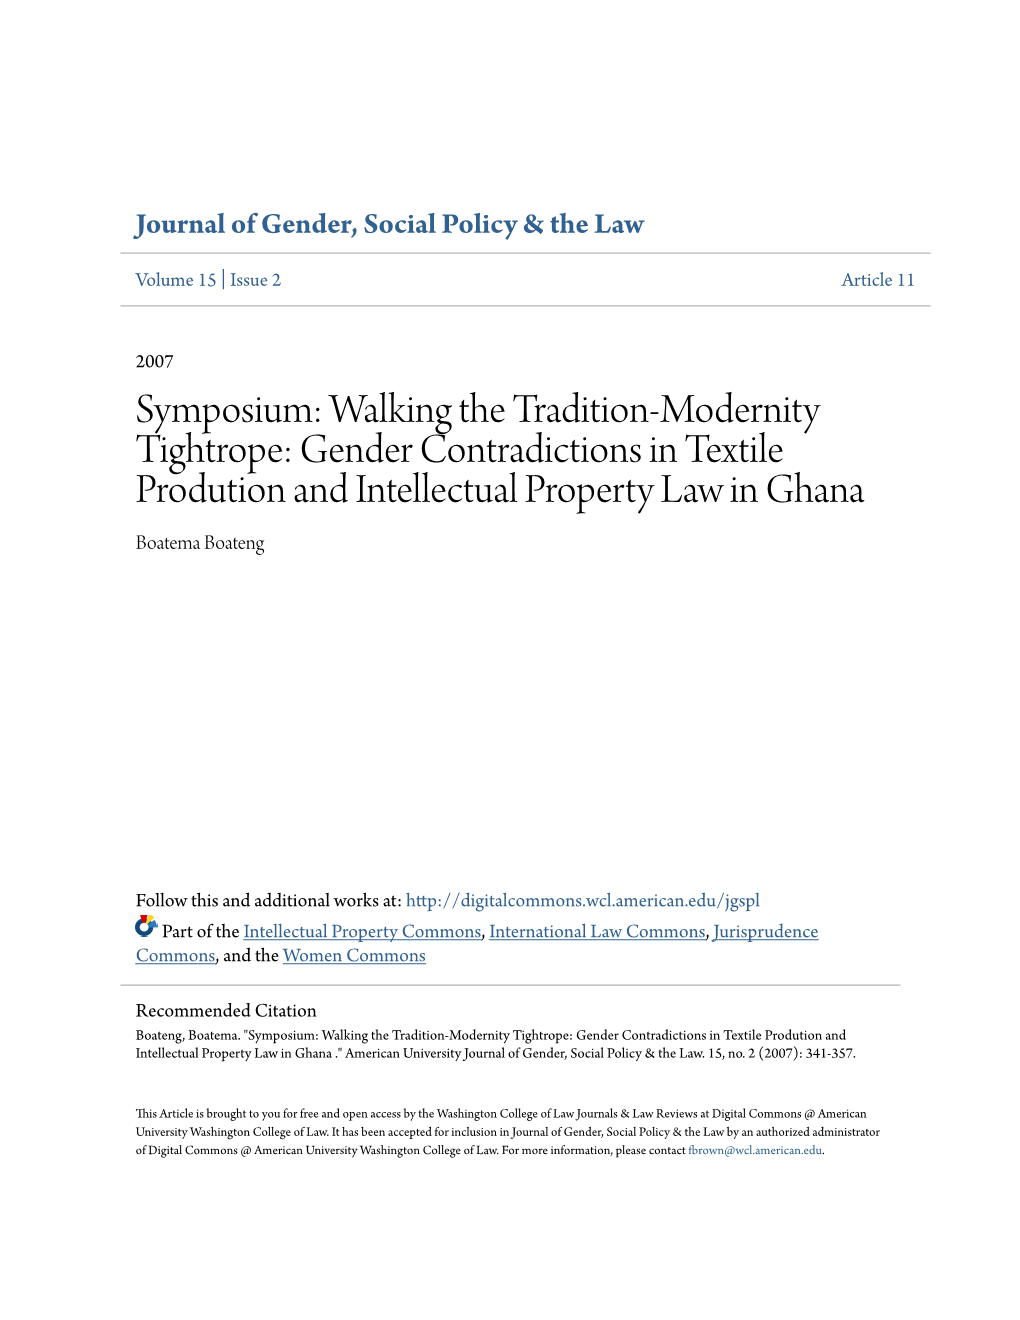 Walking the Tradition-Modernity Tightrope: Gender Contradictions in Textile Prodution and Intellectual Property Law in Ghana Boatema Boateng